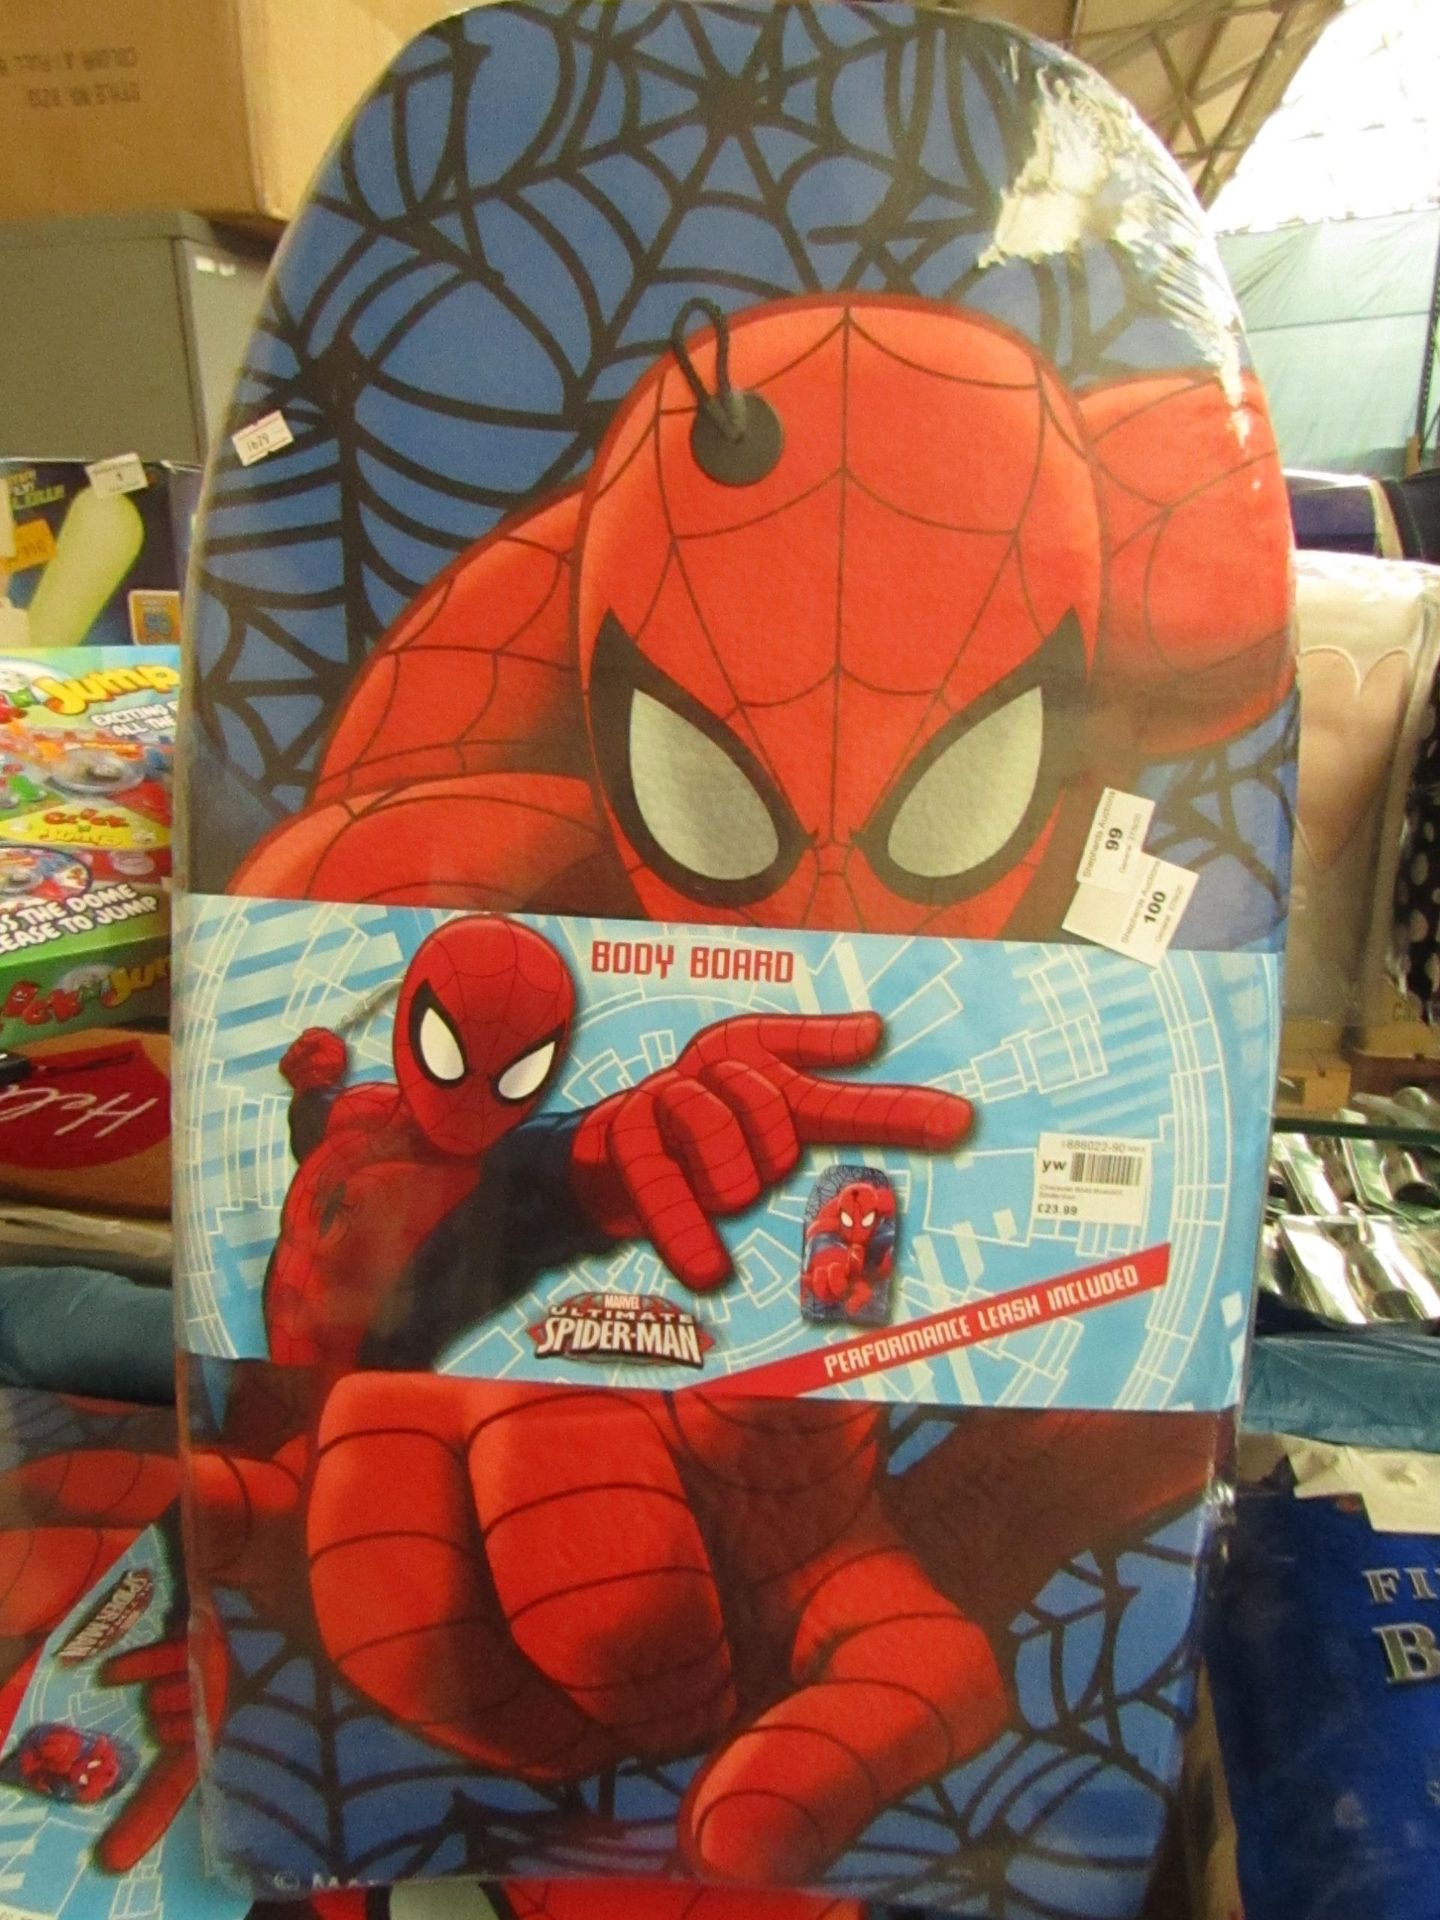 Marvel - Spider-Man Body Board (Performance Leash Included) - Like Brand New with Packaging.